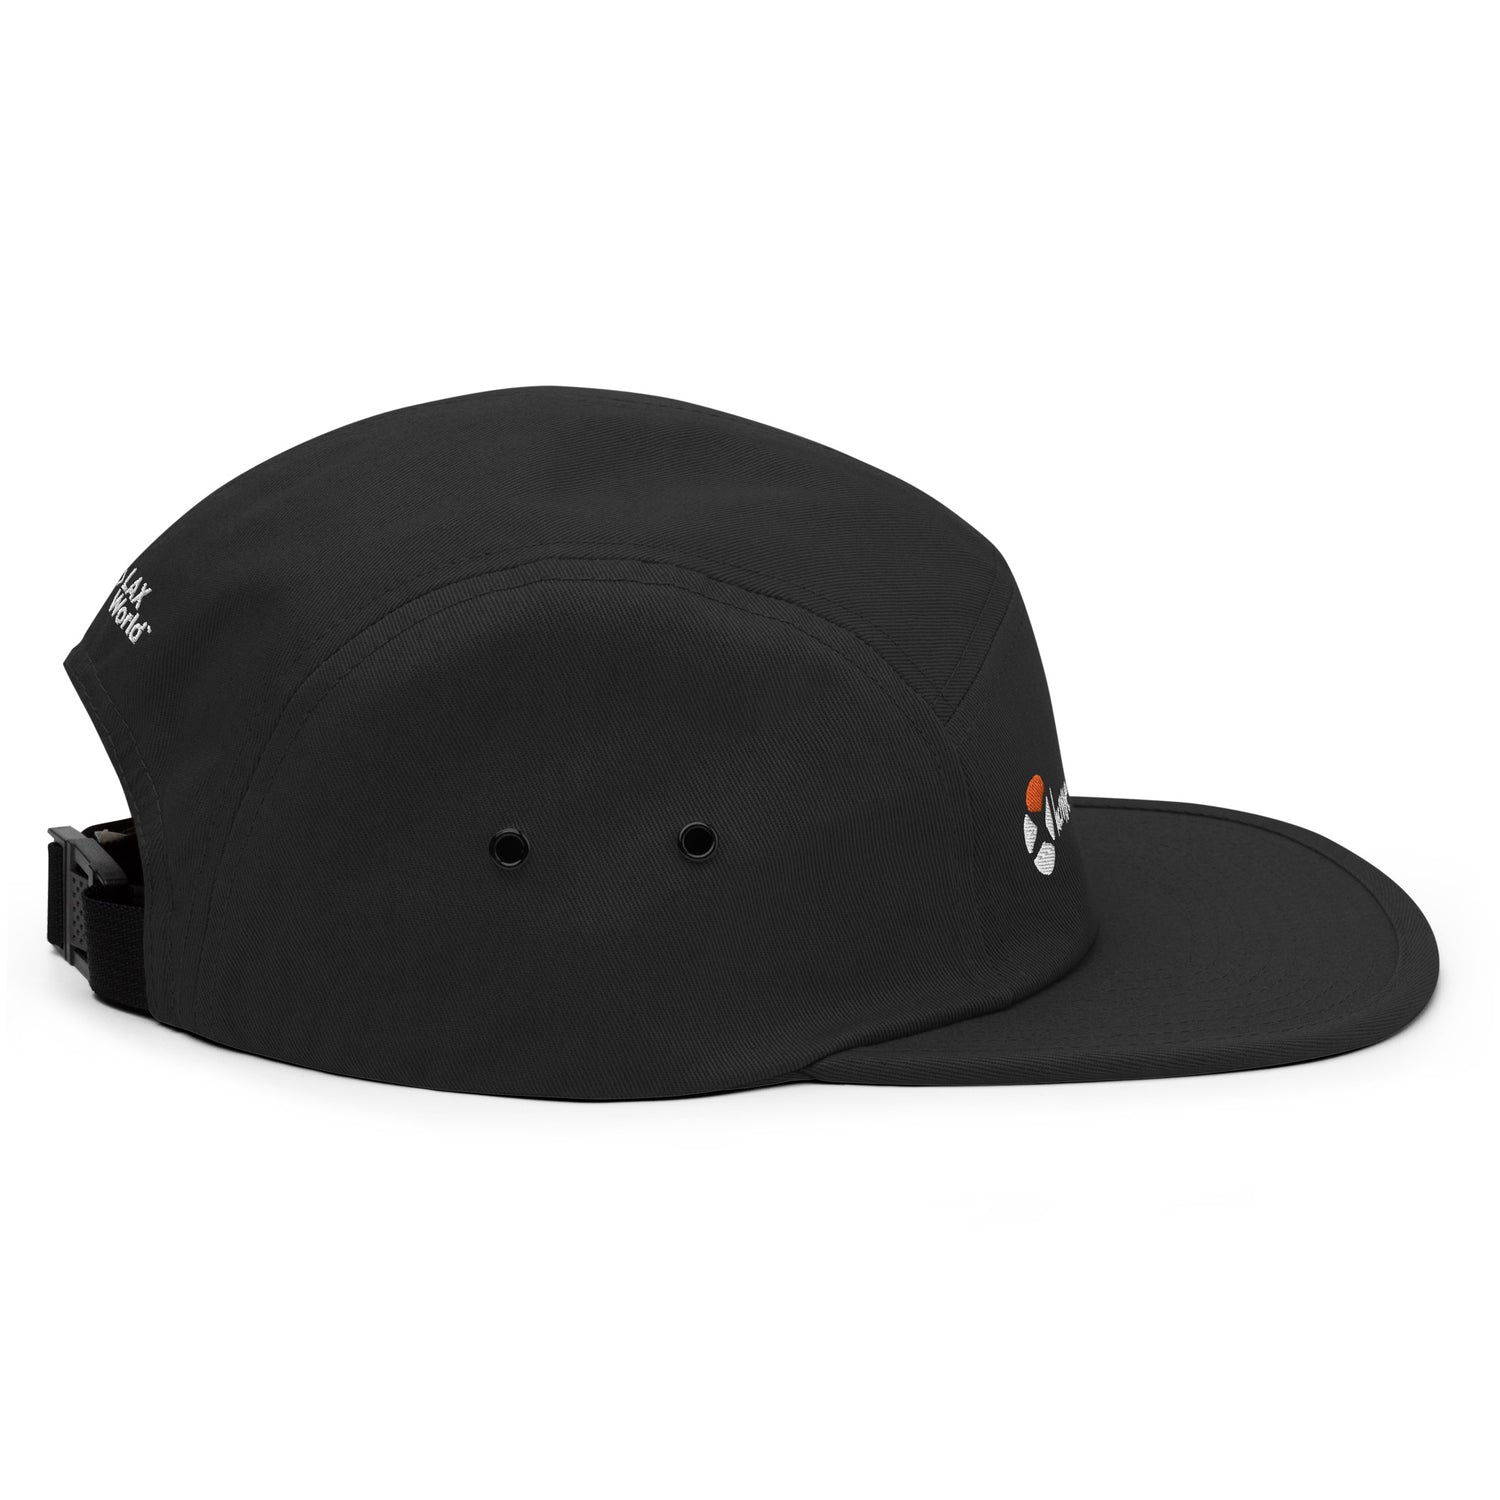 LAX World’s x Lacrosse The Nations’ Classic Black Five Panel Lacrosse Cap - Right Front 